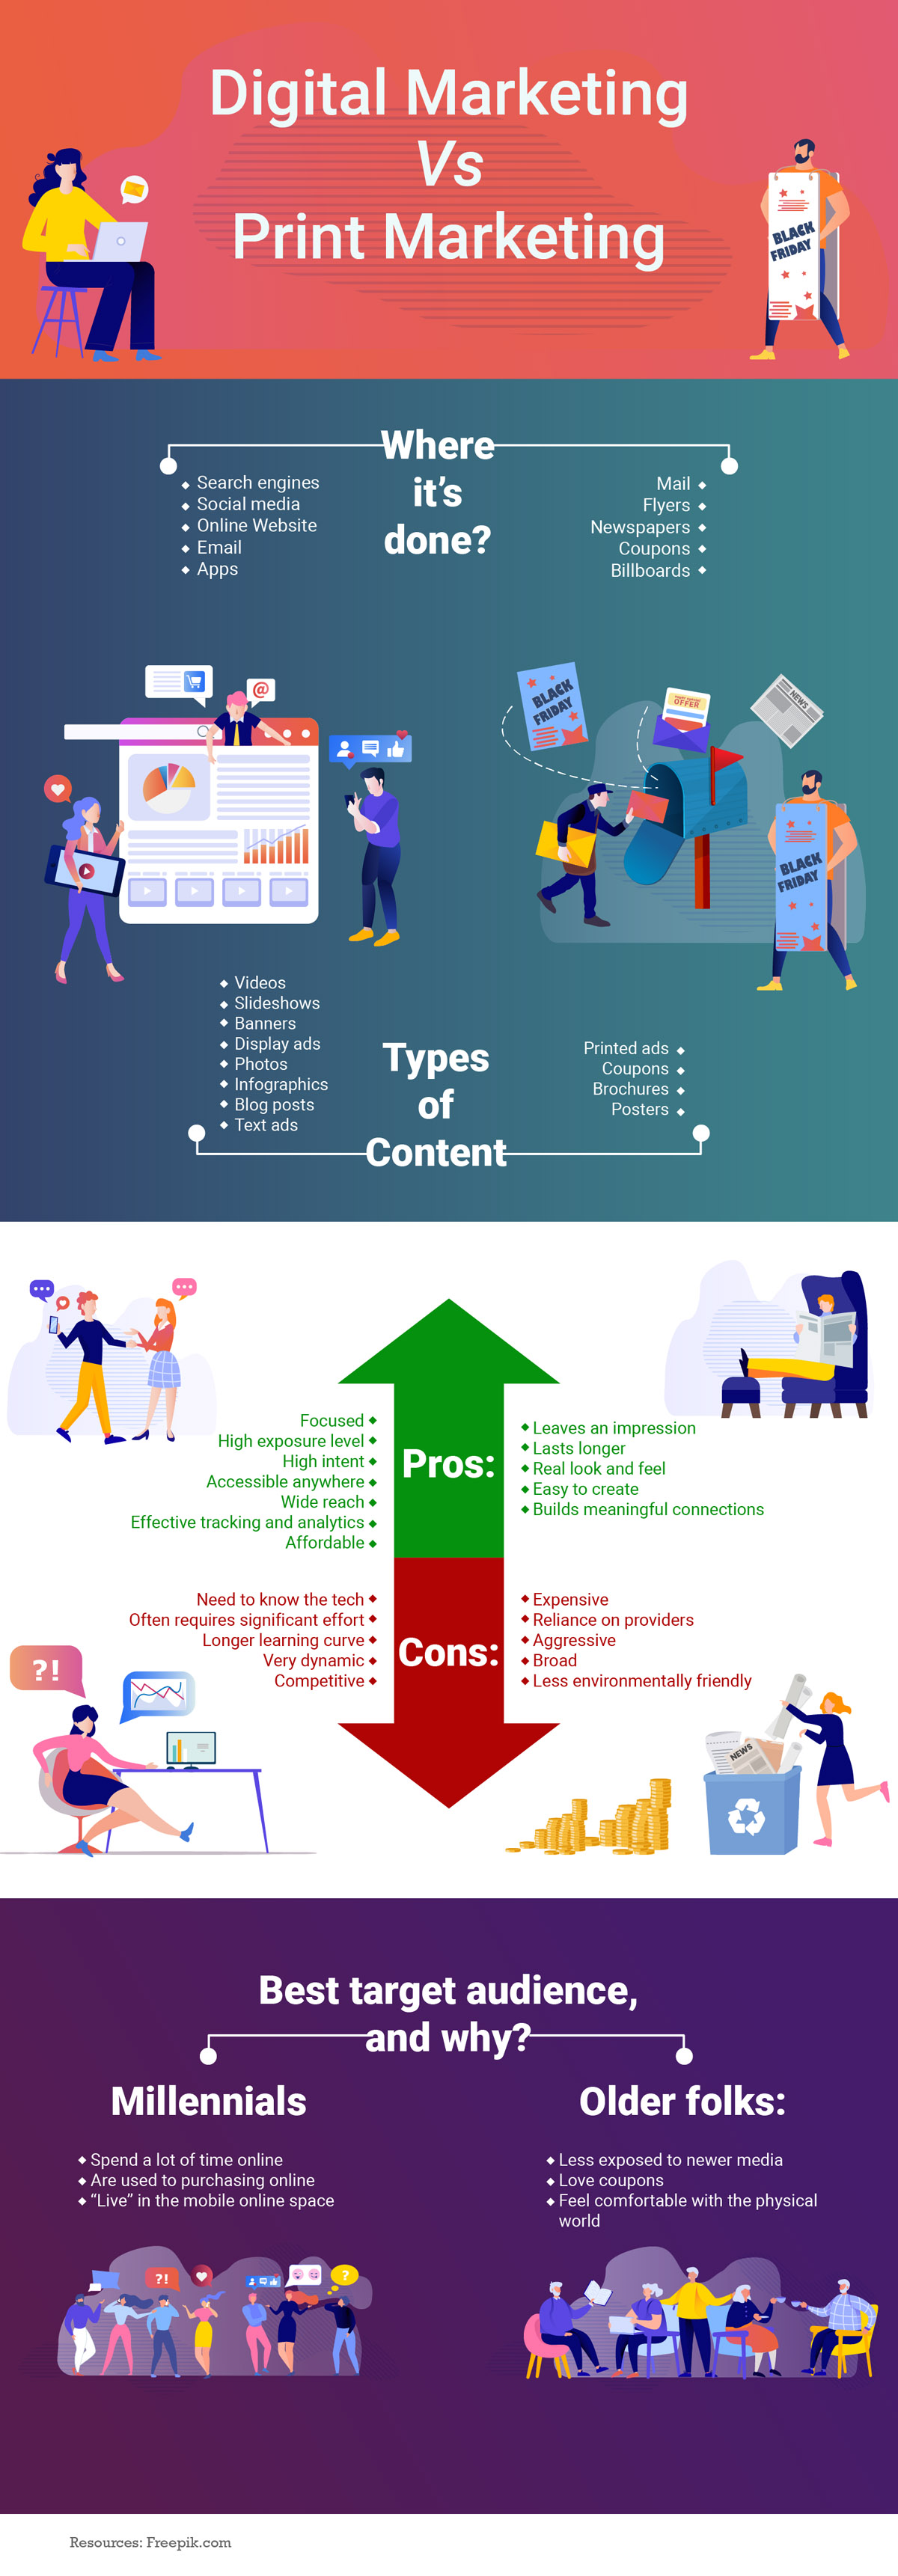 The Pros and Cons of Digital Marketing vs. Print Marketing